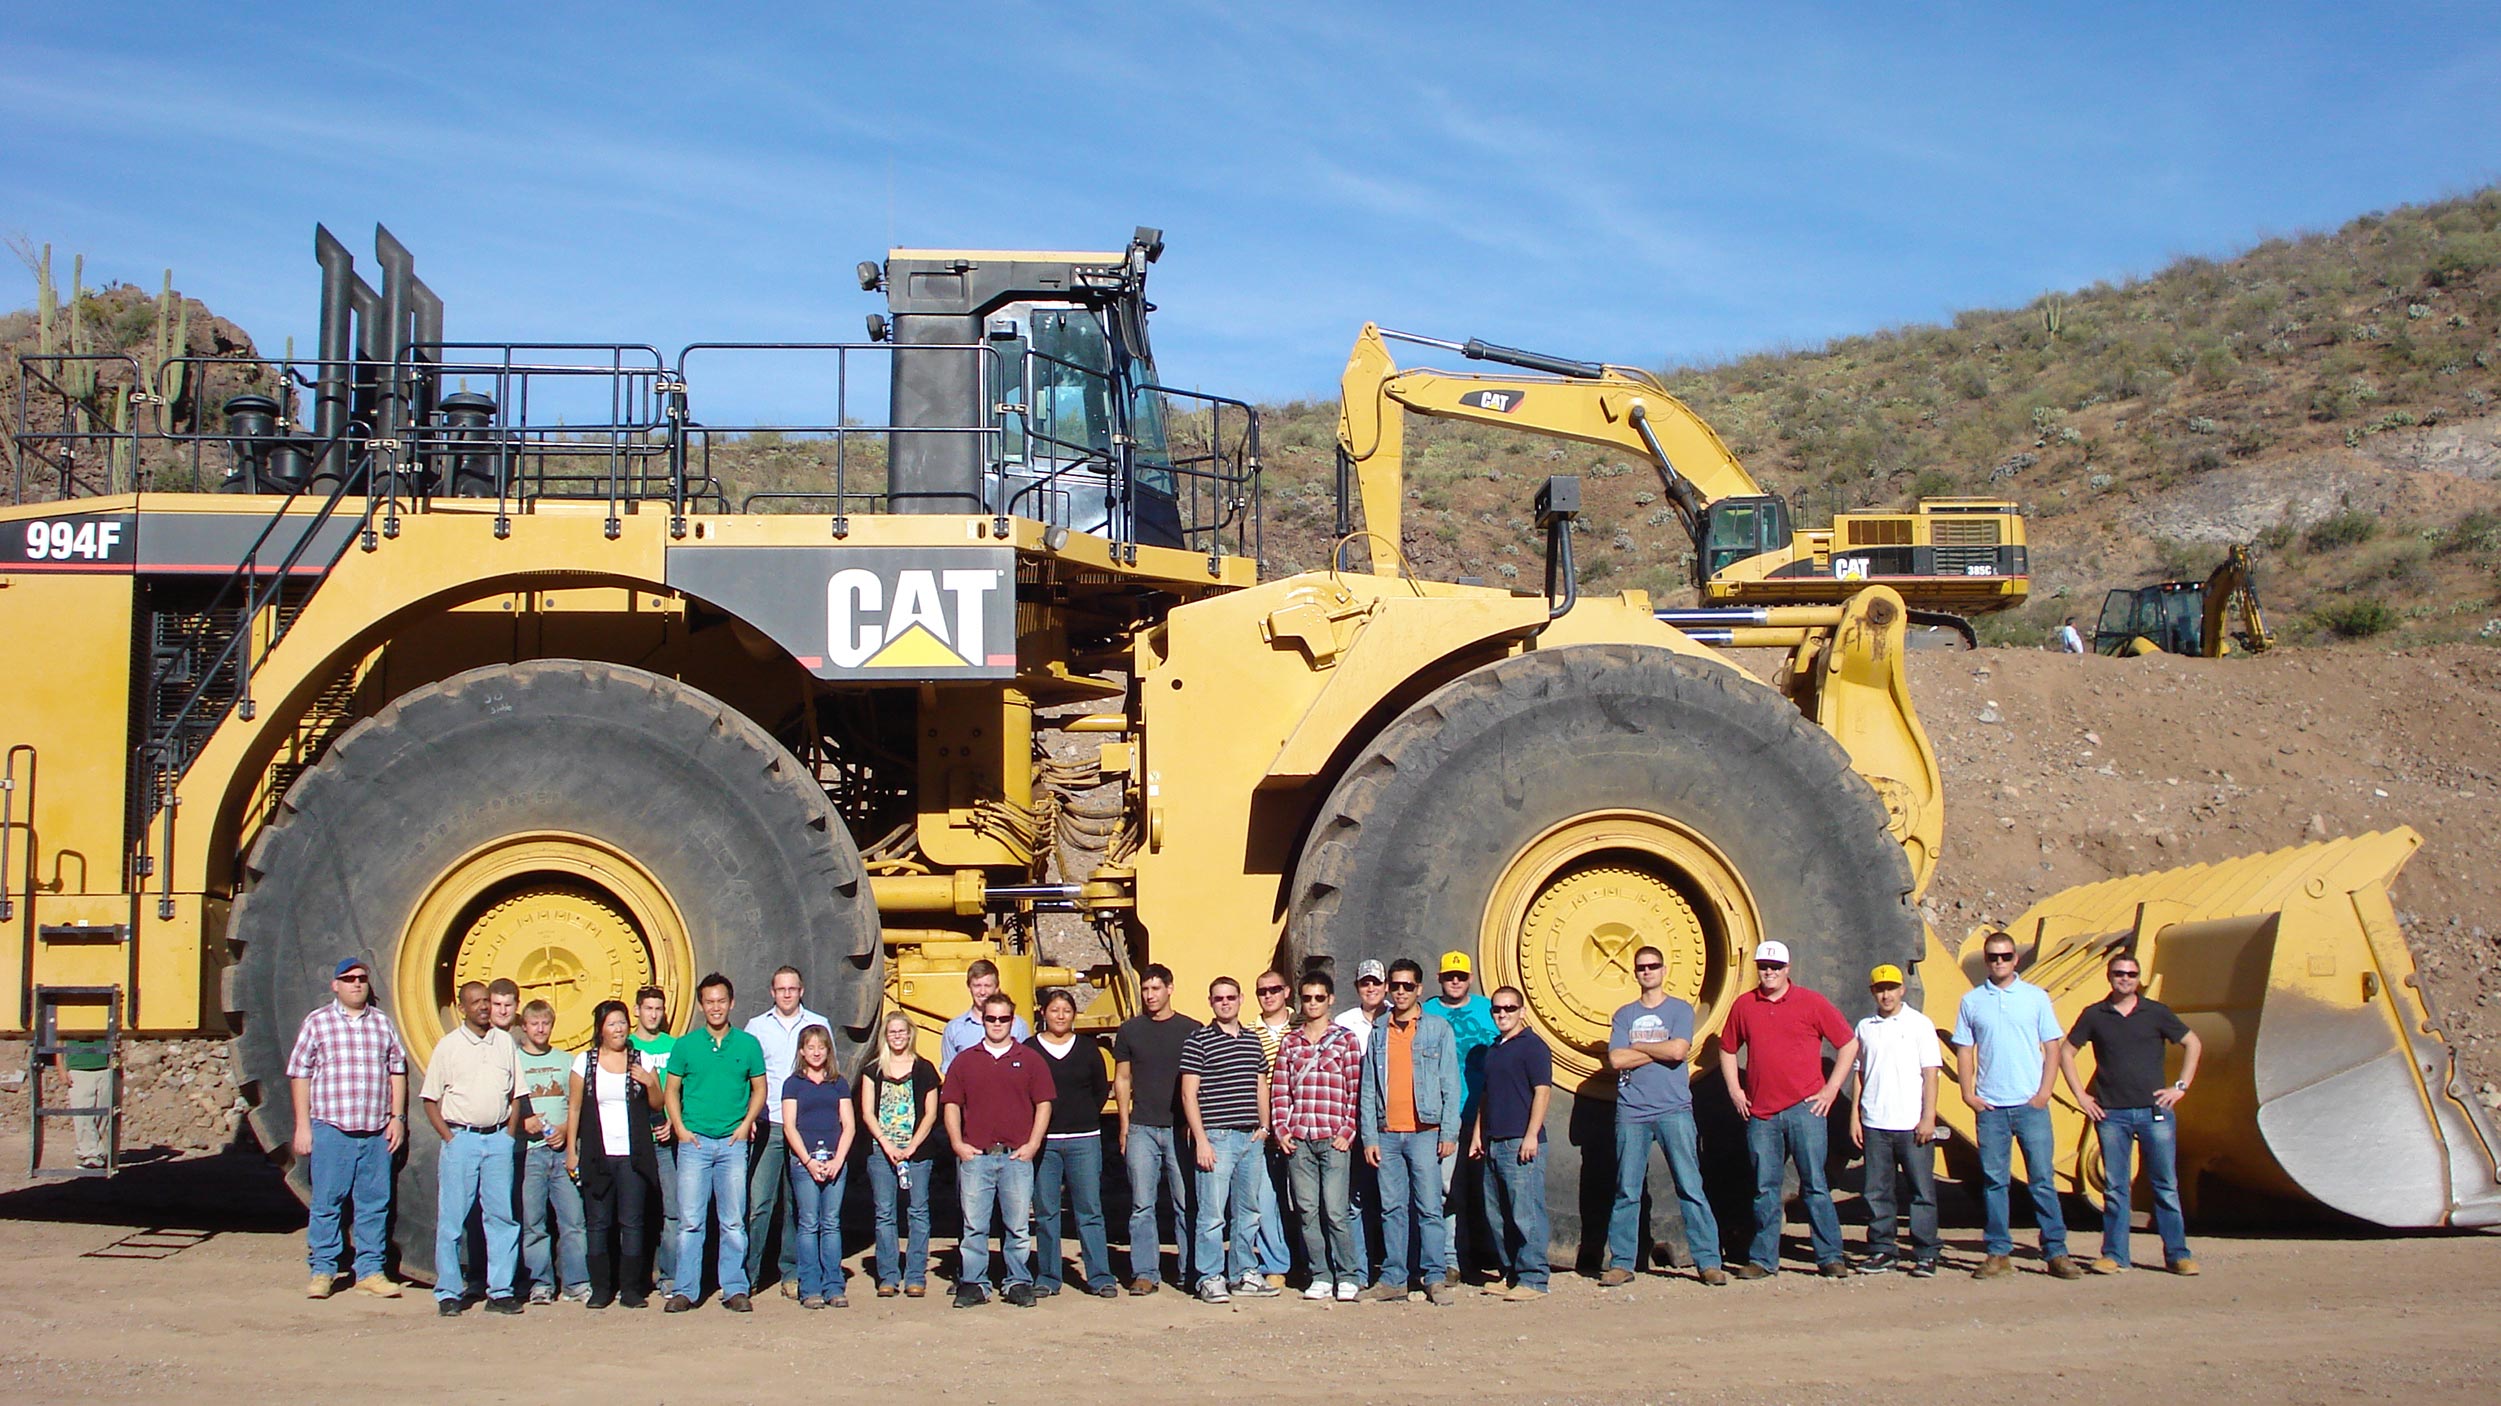 A group of students and construction professionals stand before an enormous CAT construction vehicle